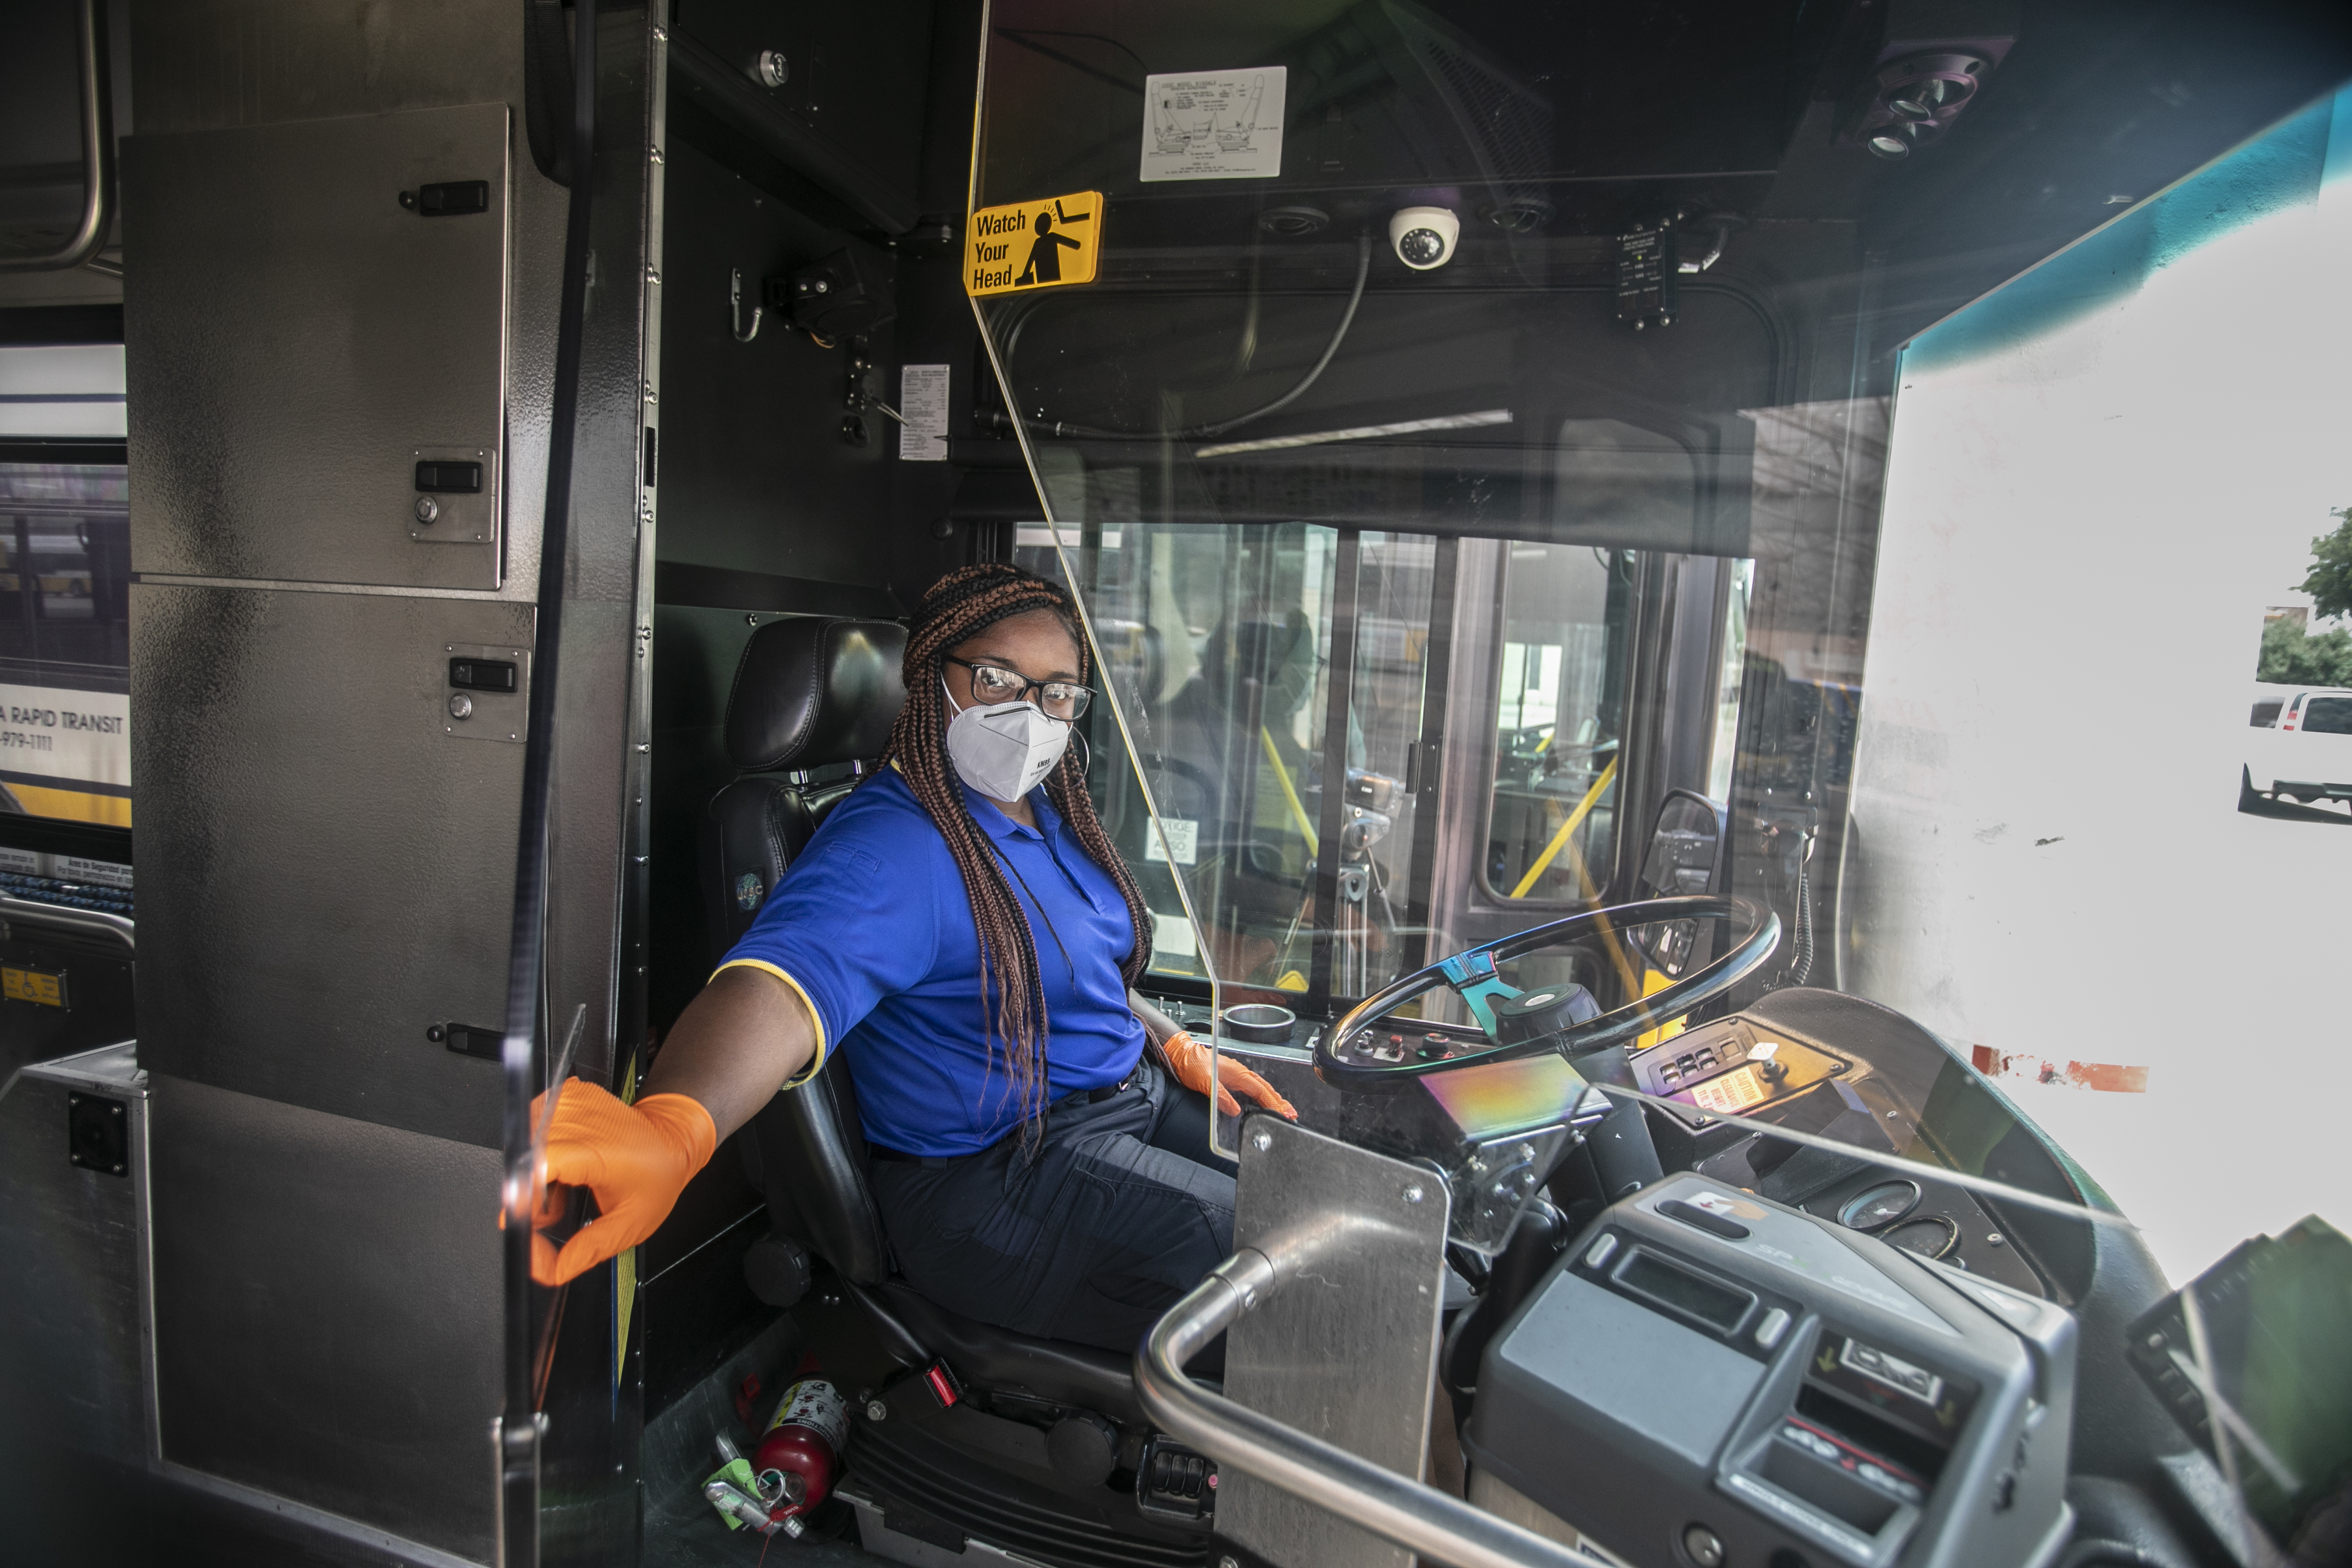 DART bus operator holds respiratory droplet shield. These shields are made of high-impact plexiglass and help protect operators and passengers during the COVID-19 pandemic.